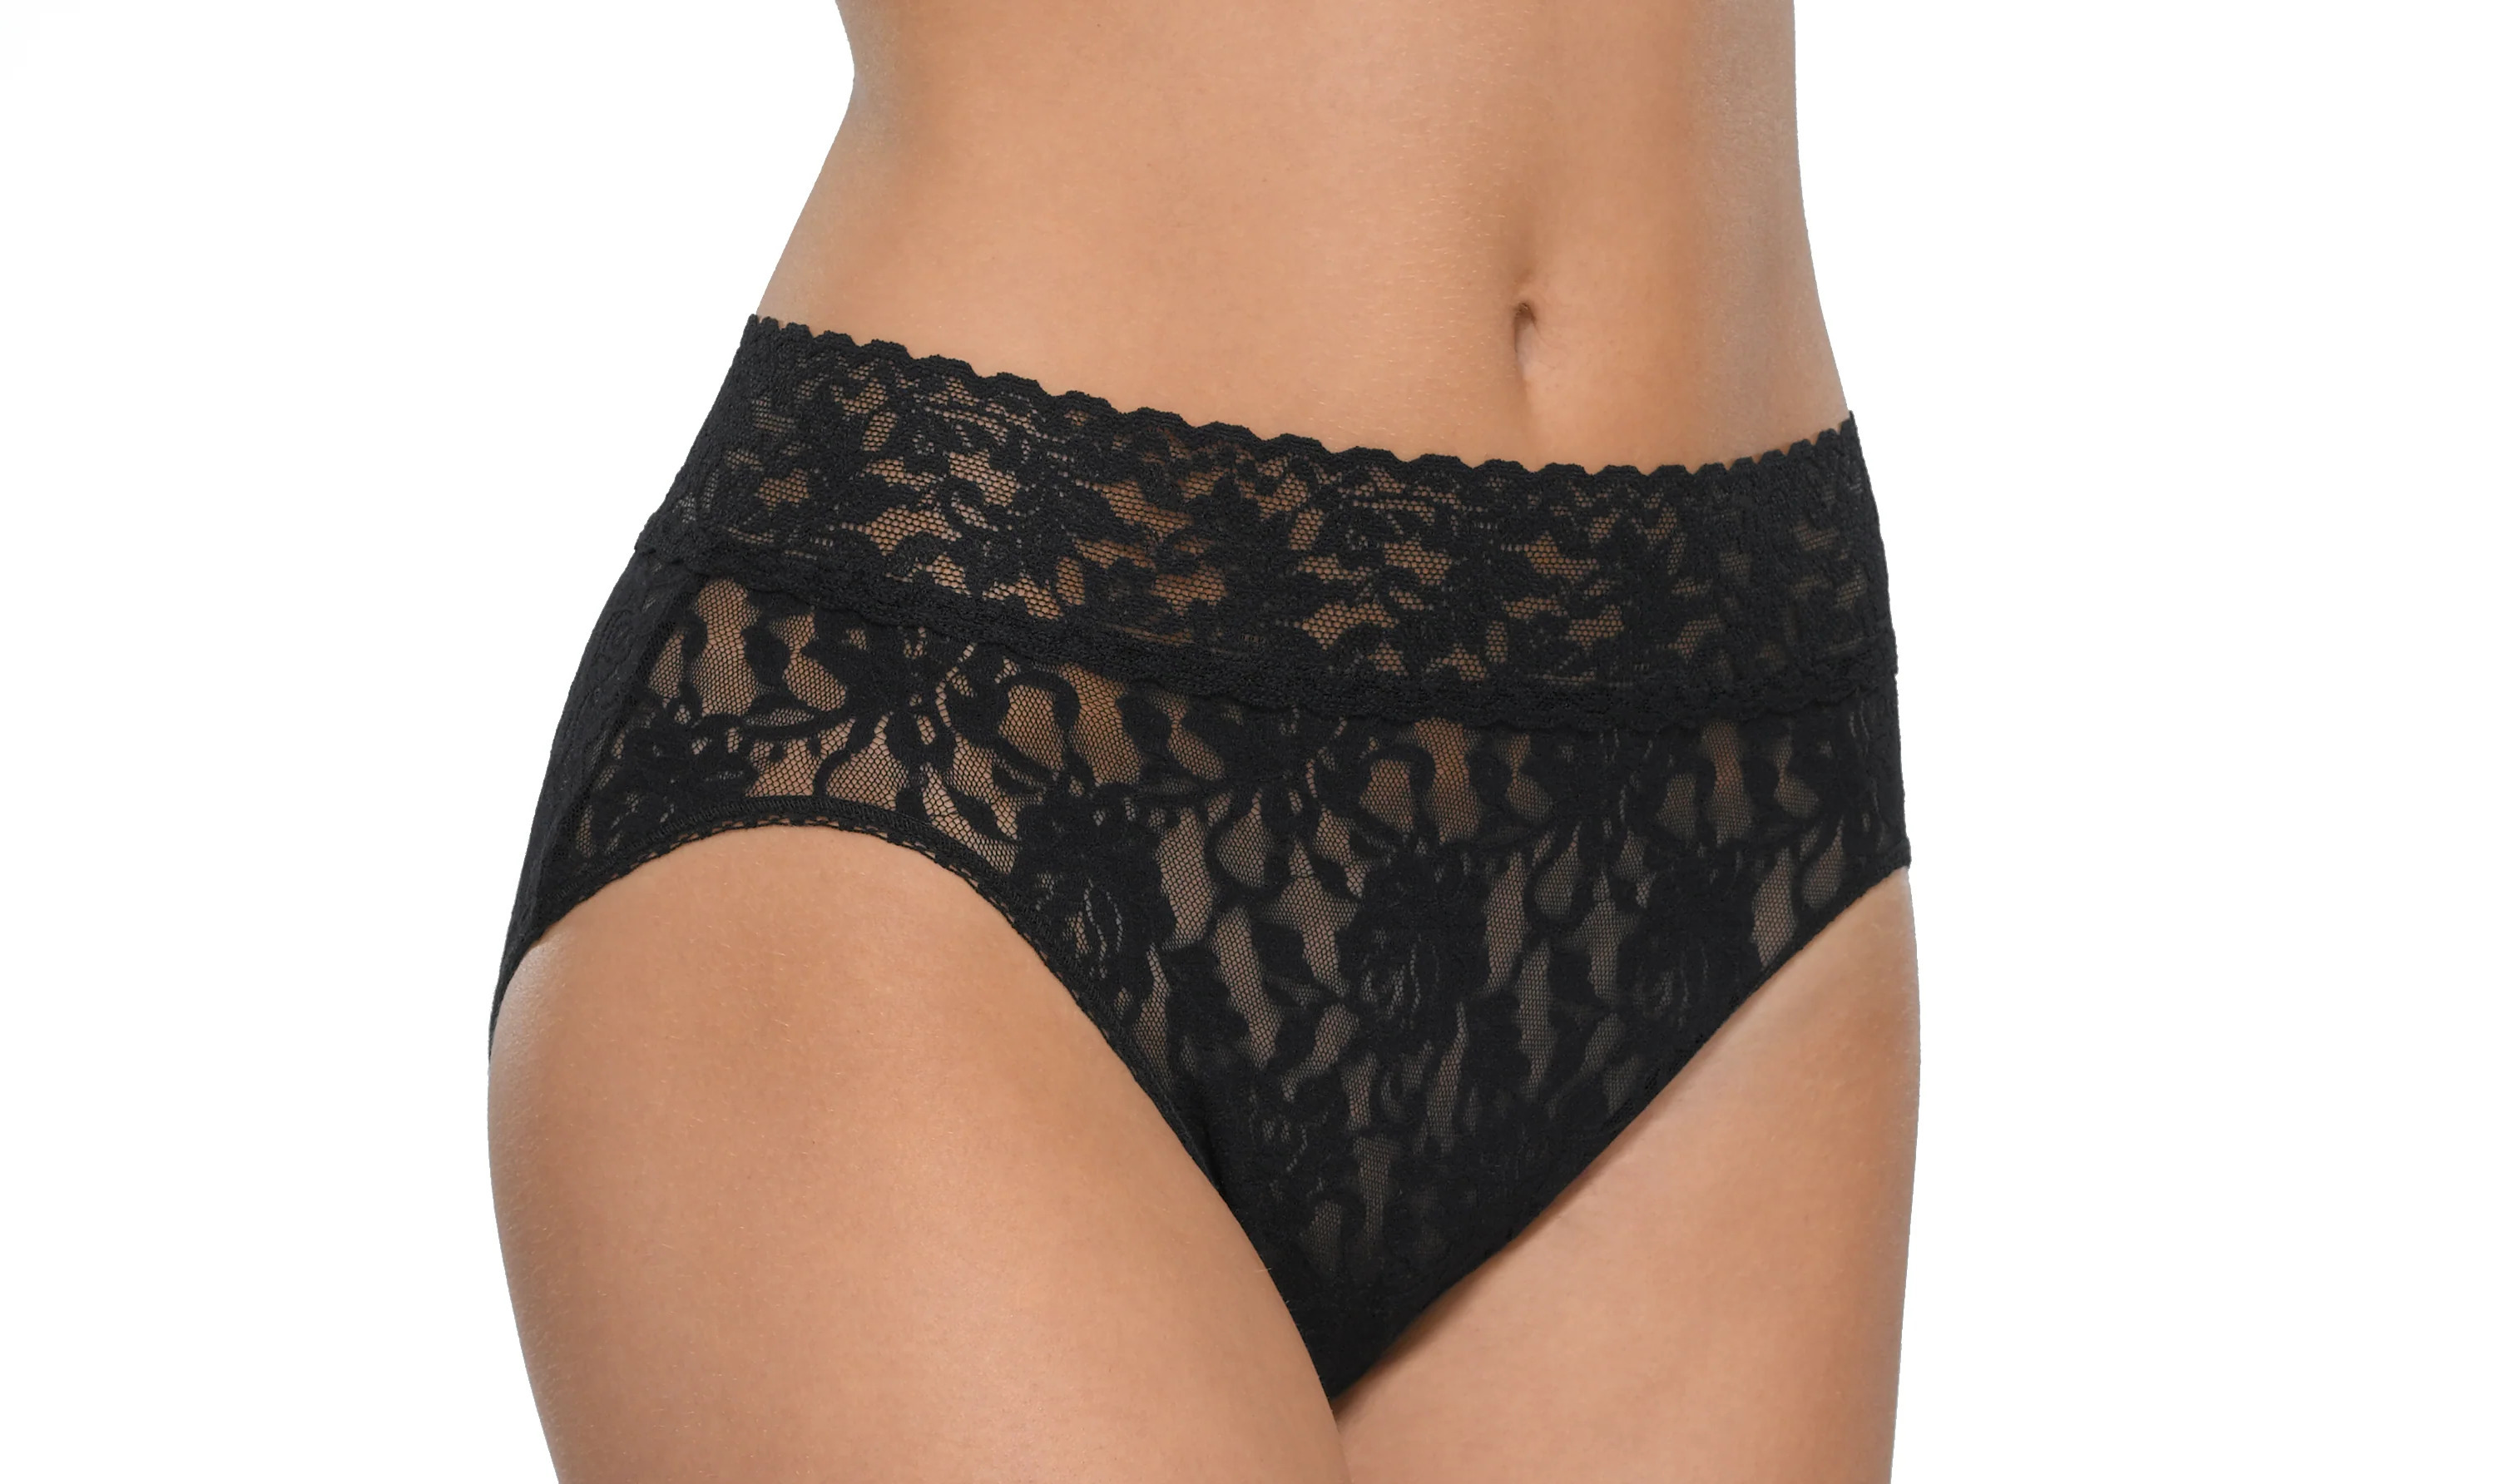 13 Best Lace Panties For Women for 2023